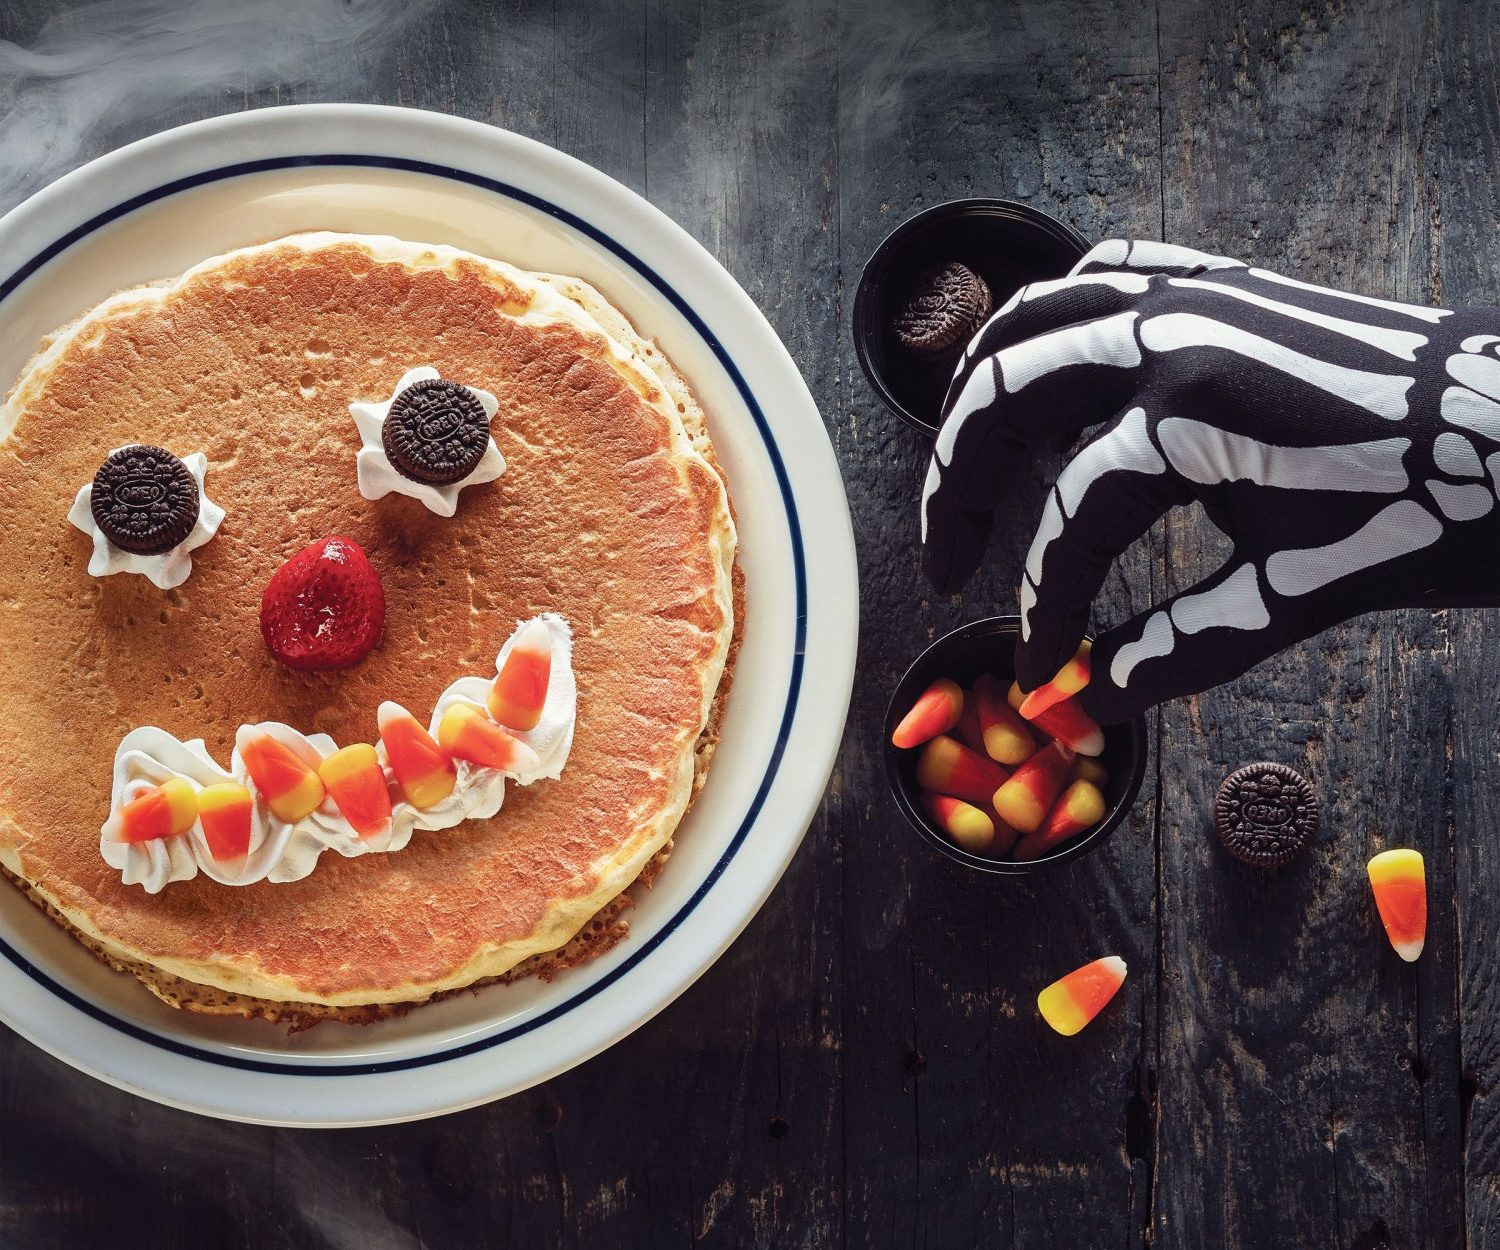 Ihop Free Pancakes Halloween
 Your kids can a free spooky pancake from IHOP on Halloween